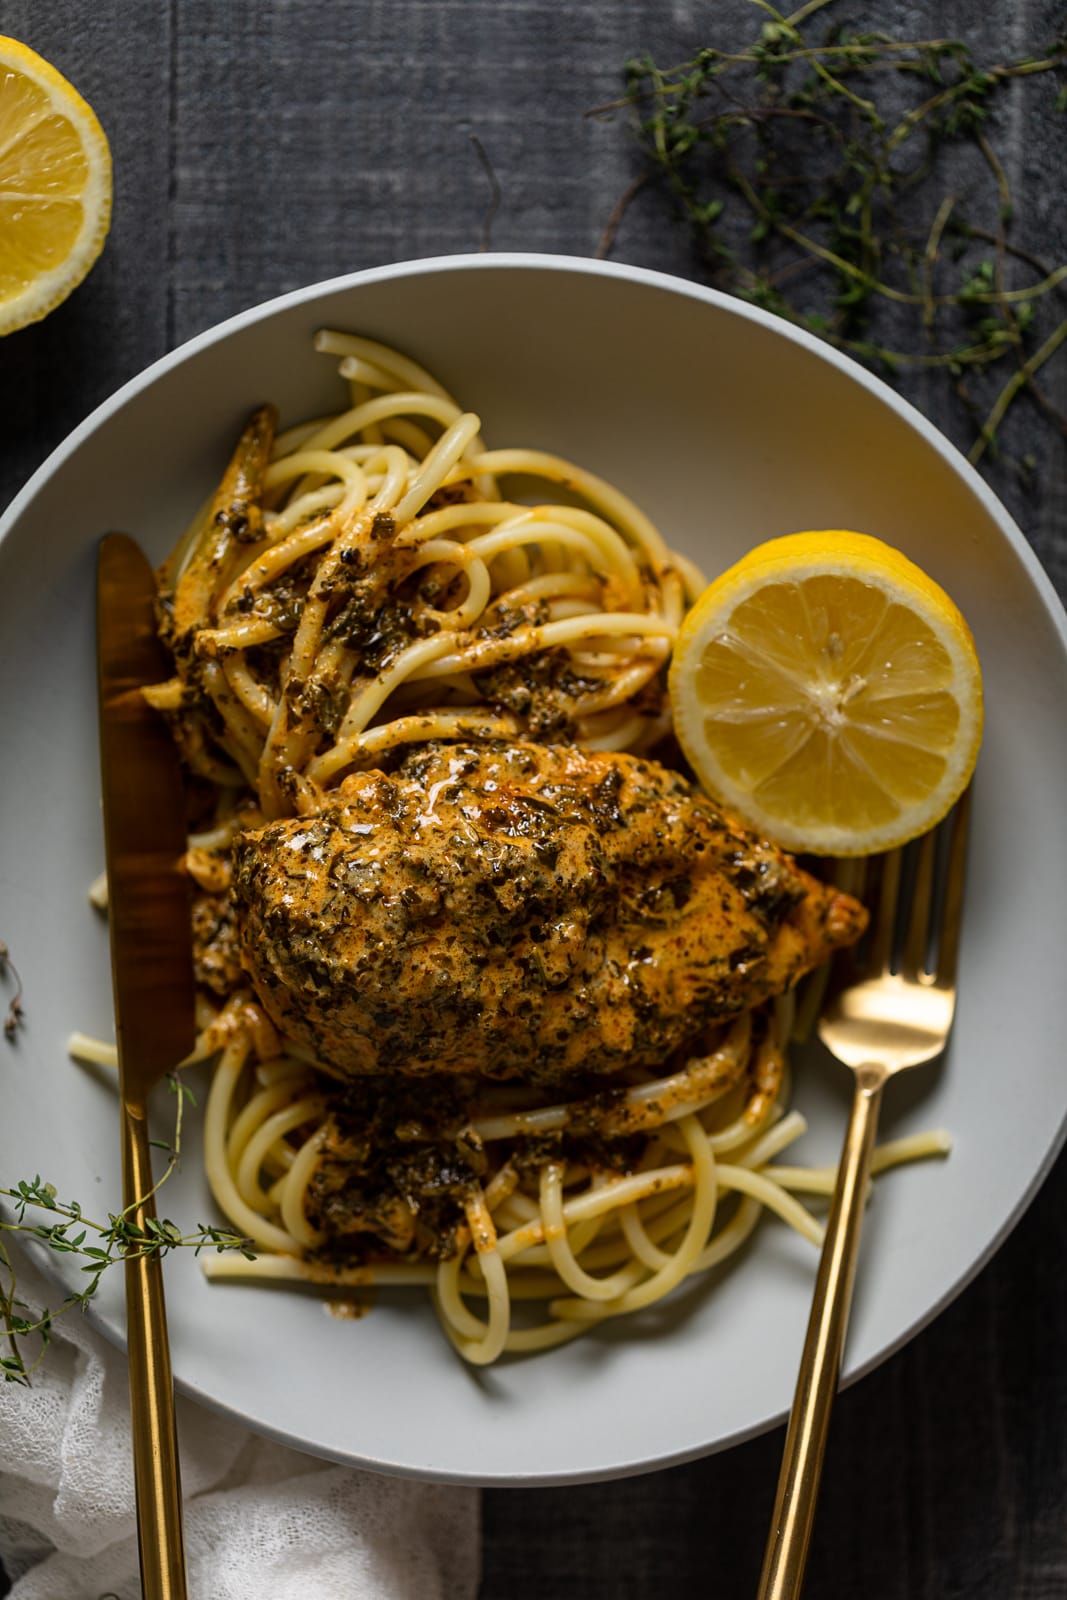 Plate of Creamy Lemon and Herb Parmesan Chicken with utensils